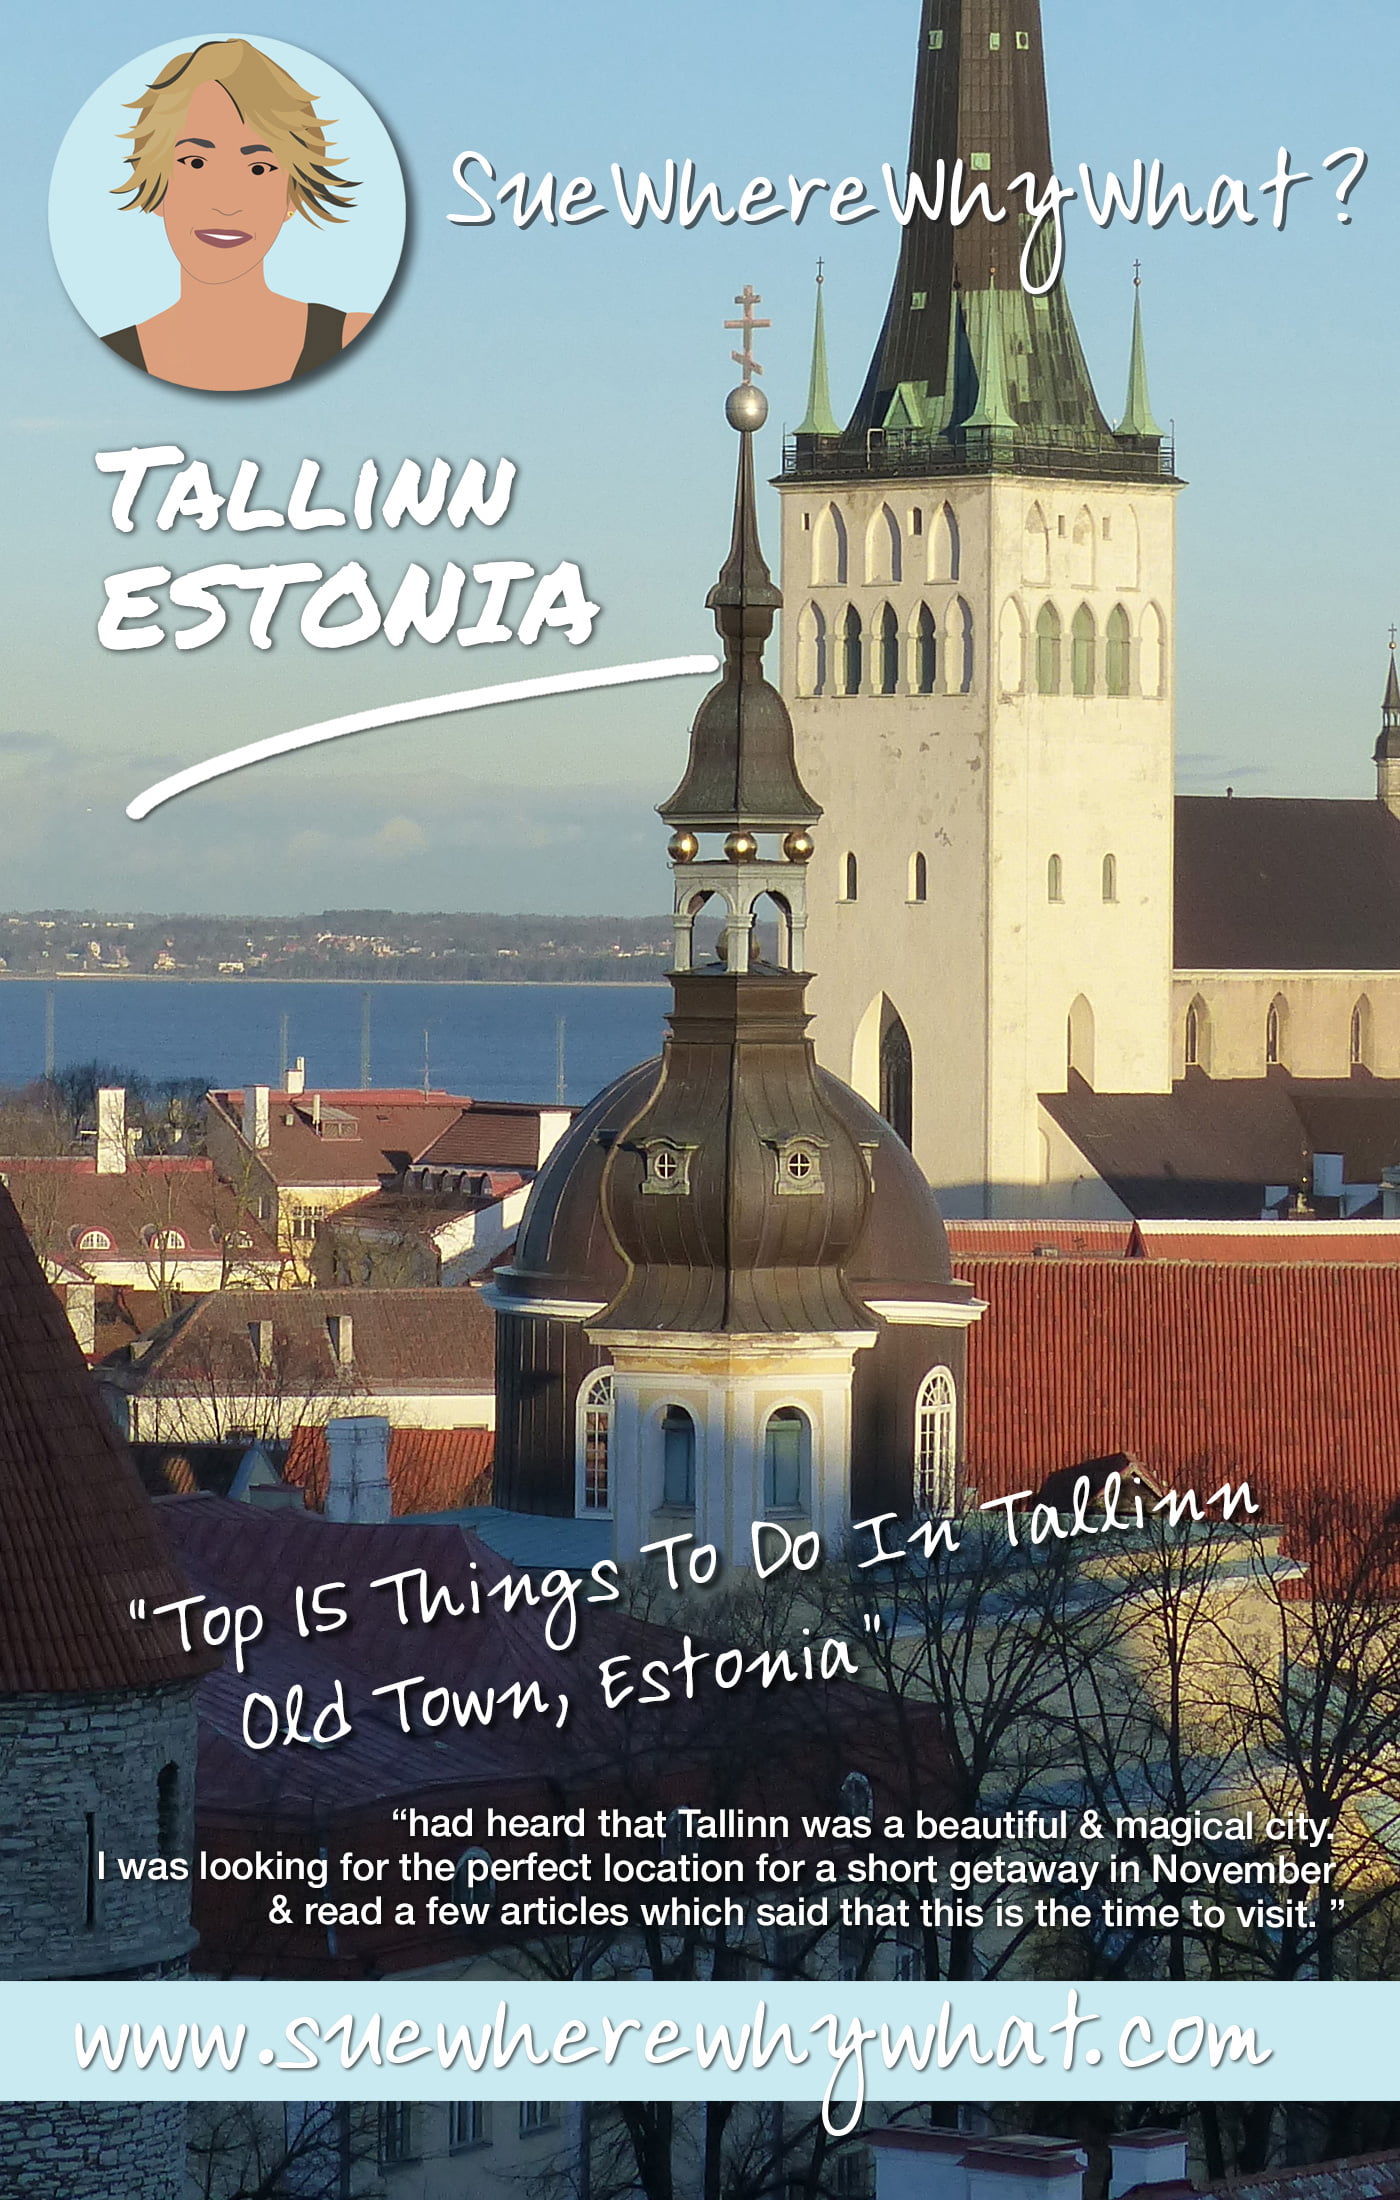 Top 15 Things To Do In Tallinn Old Town, Estonia